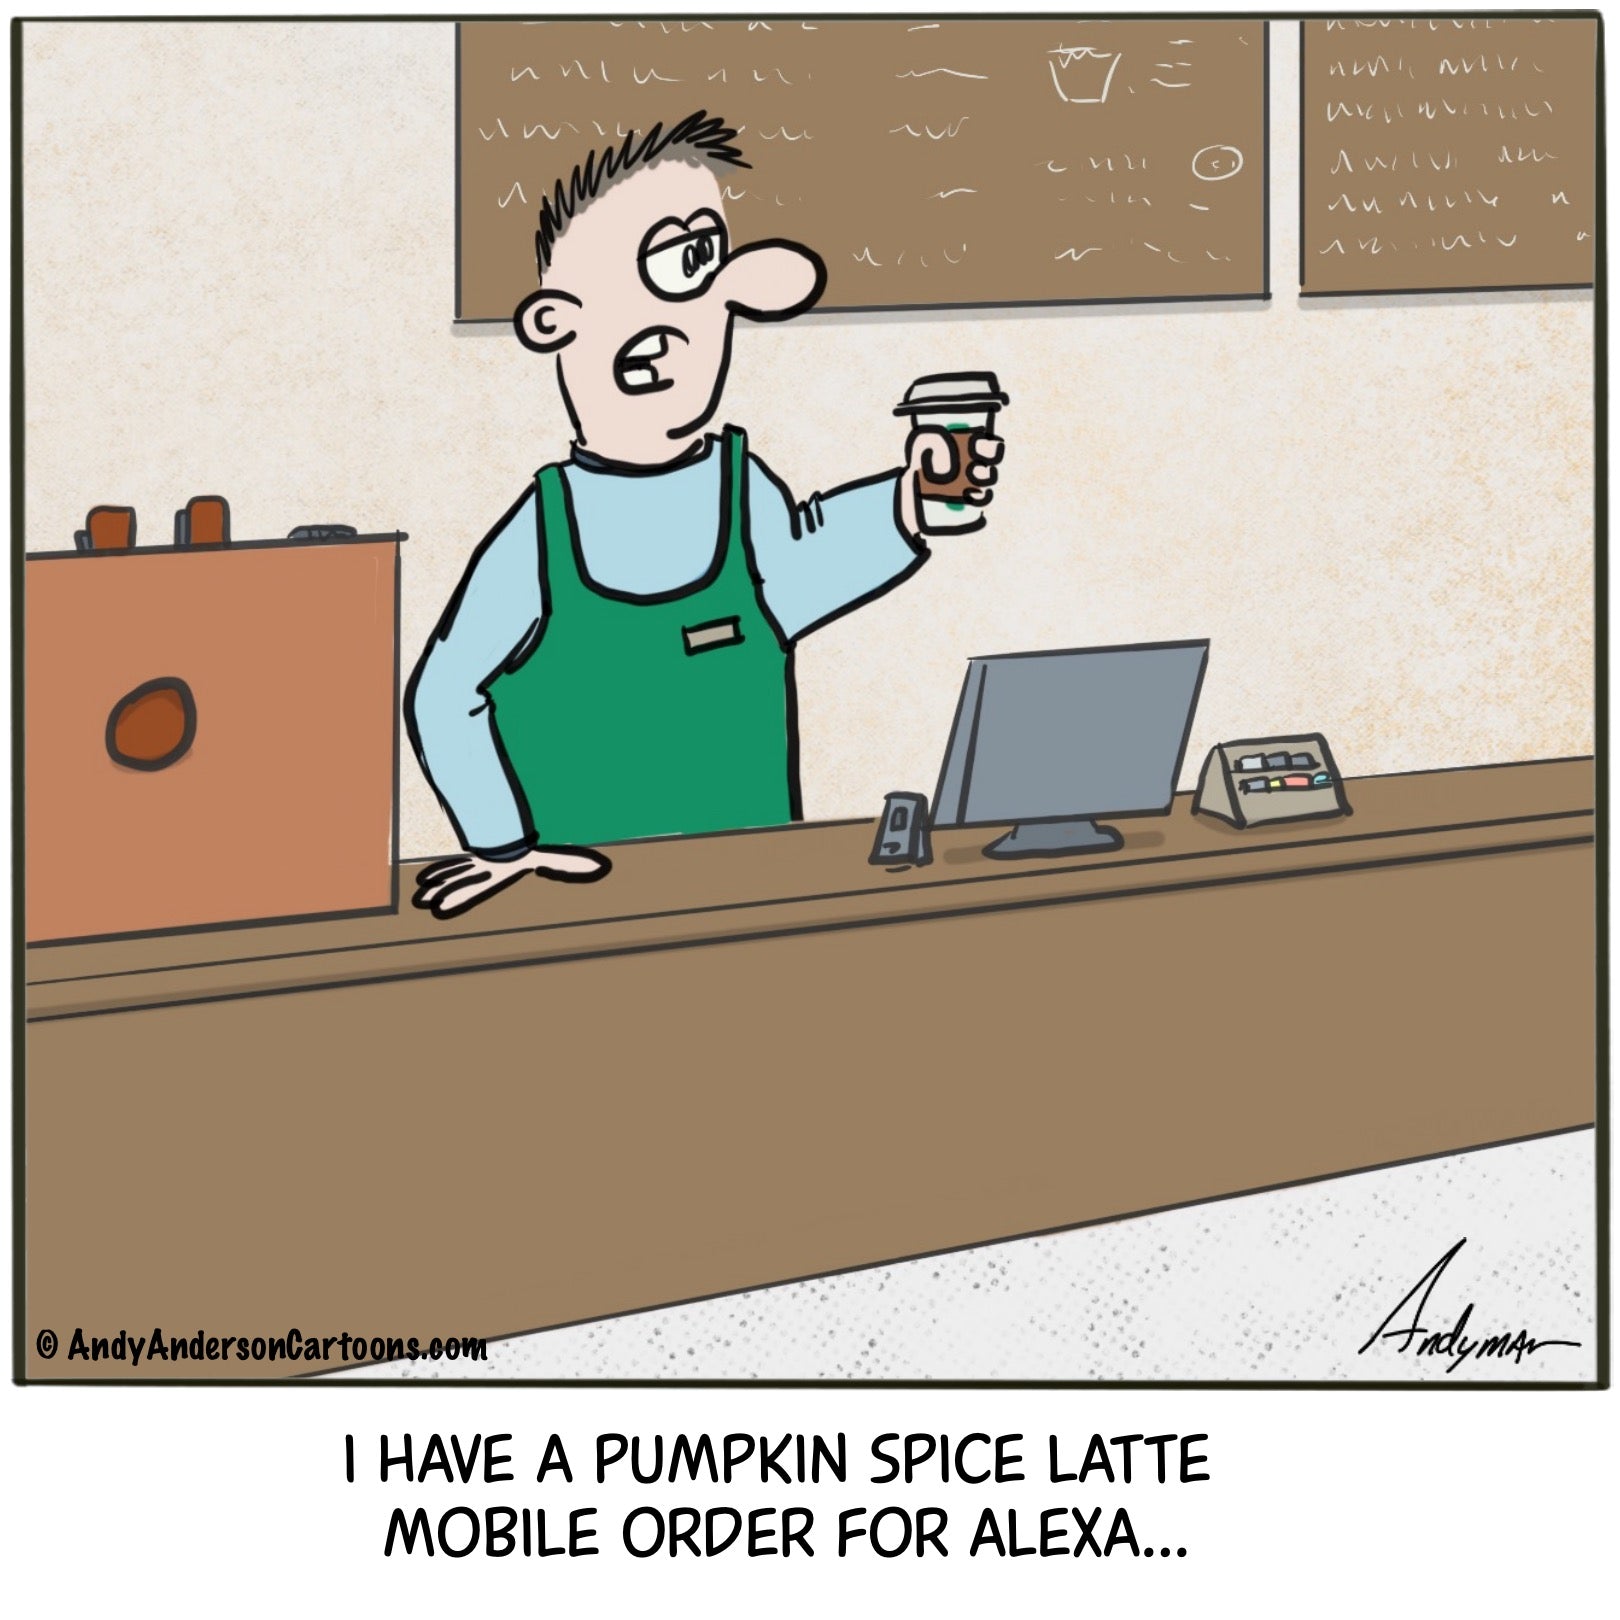 Pumpkin Spice Latte for Alexa cartoon by Andy Anderson